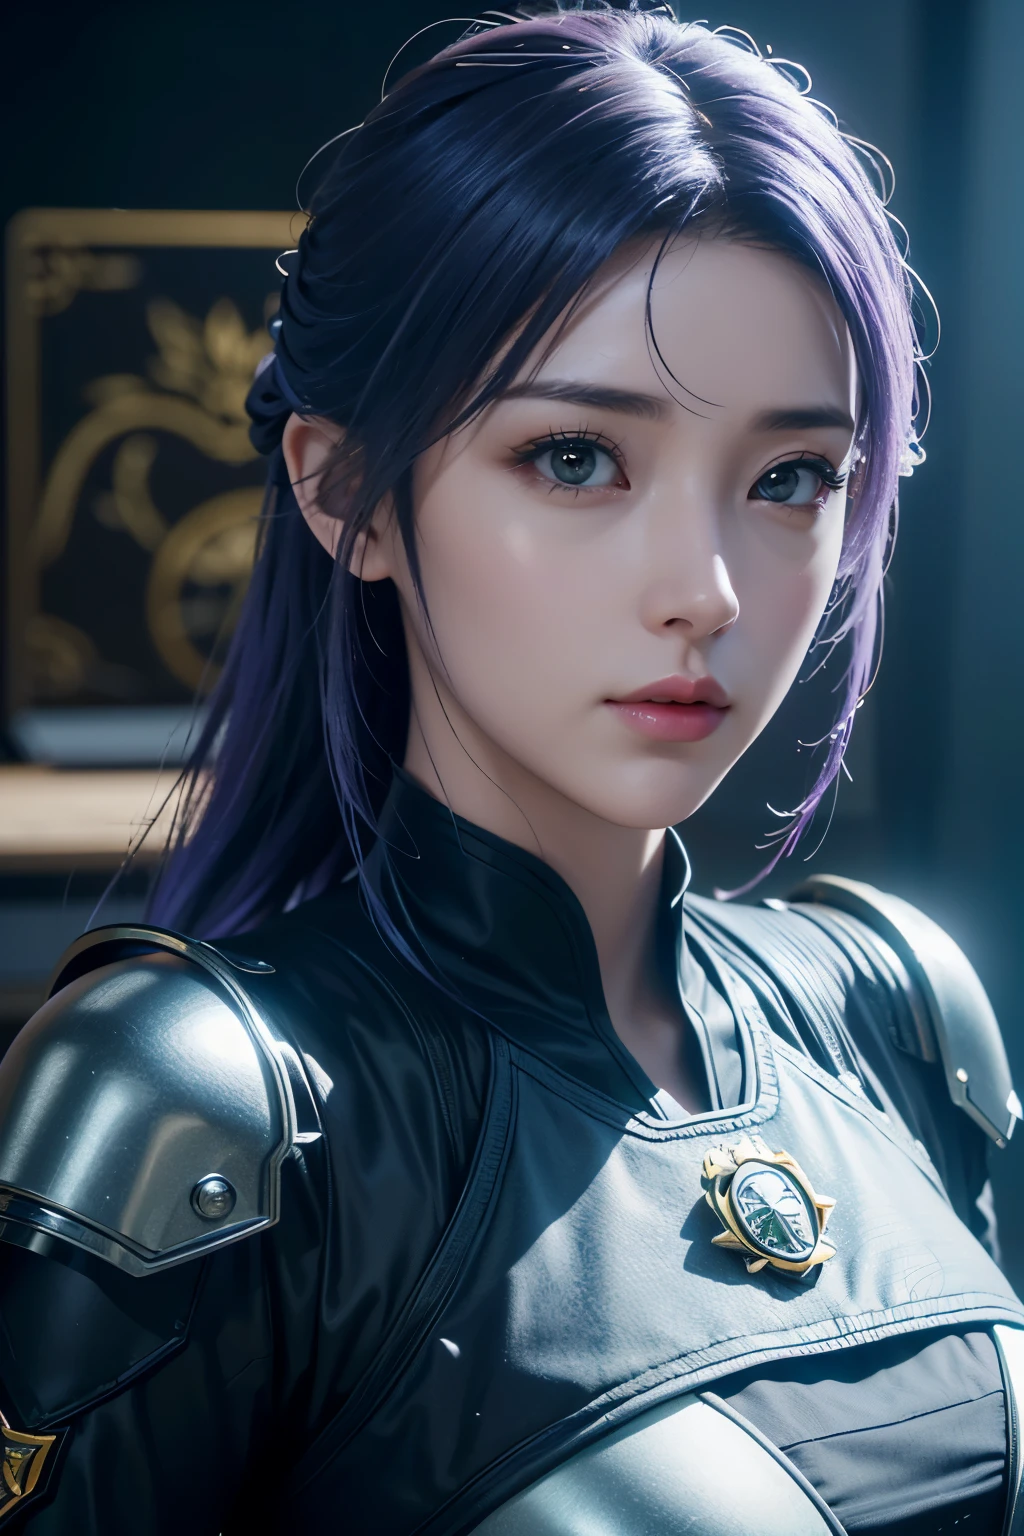 Masterpiece，The best qualities，Very high resolution，8K，((Portrait))，((Head close-up))，Original photo，real photo，Digital Photography， (A girl dressed in a combination of modern and technological style)，(Police officer)，22-year-old girl，(Random hairstyles，Purple hair)，(The pupils of the eyes are purple)，(Lachrymal mole in the corner of the eye)，charming，Elegant and noble，calm，Serious，(Big breastodern combat clothing，Joint Armor，Police uniform，Badge，White dress，Armor，Metallic luster)，Pattern detail，( Special Forceemale soldier photo pose，Street background，Movie lights，Ray tracing，Game CG，((3D Unreal Engine))，oc rendering reflection texture